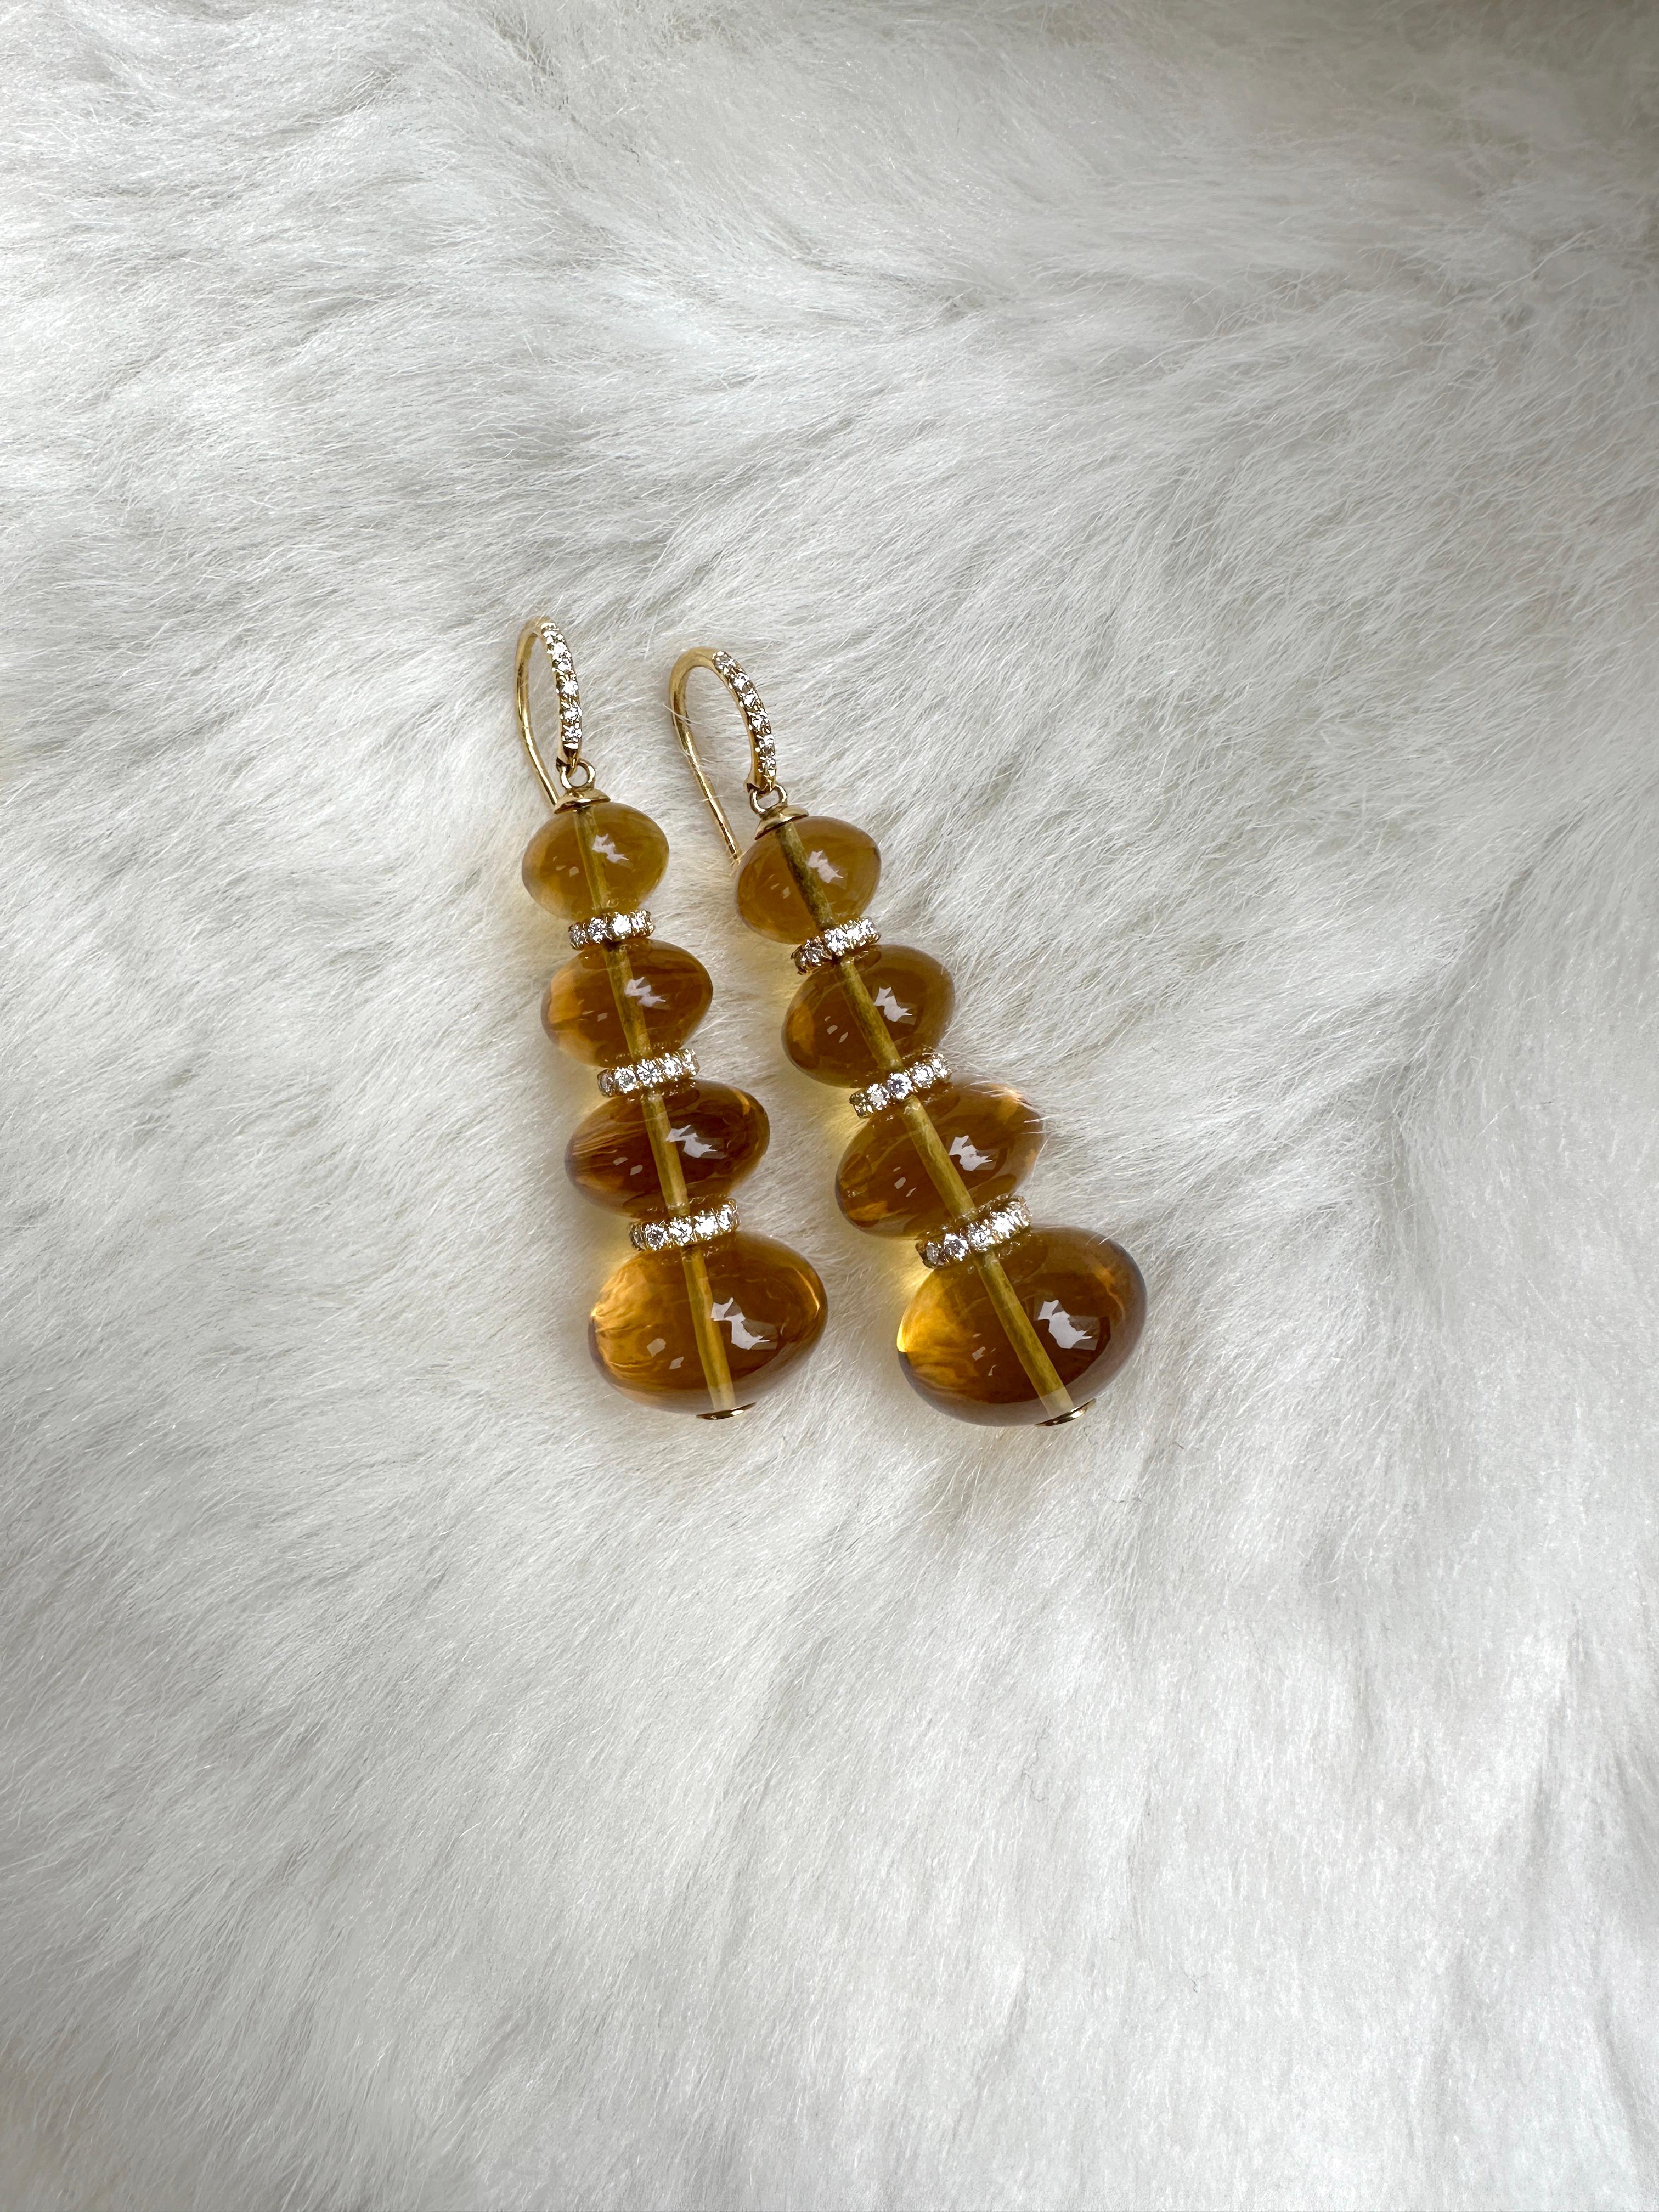 4 Tier Citrine Bead with Diamonds Earrings For Sale 1